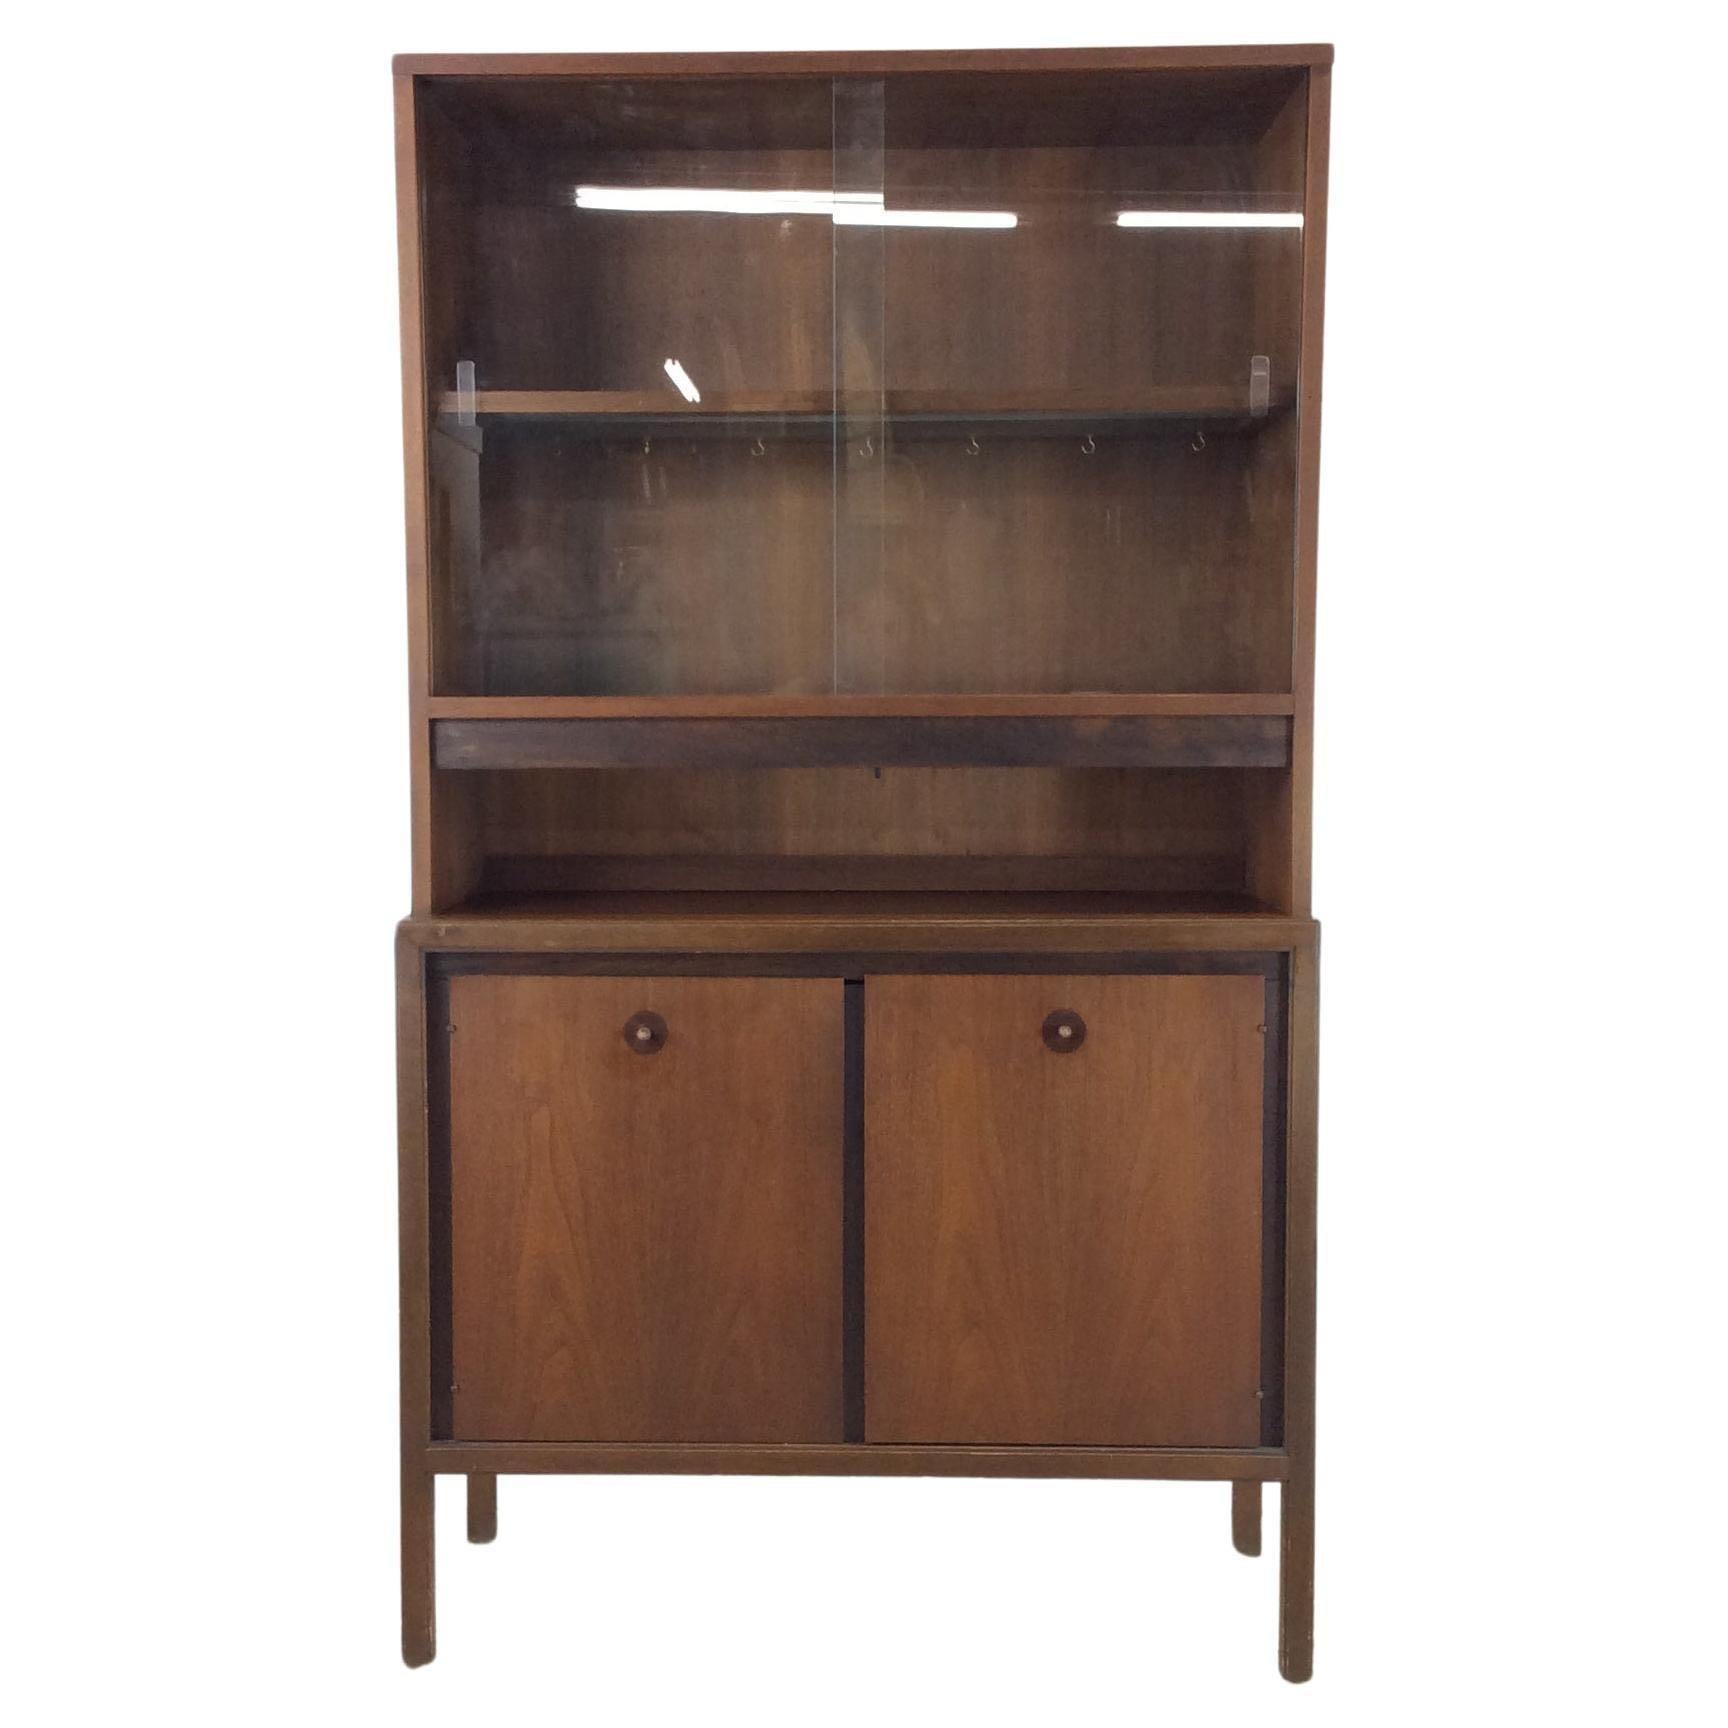 Mid Century Modern Compact China Cabinet with Lighted Display